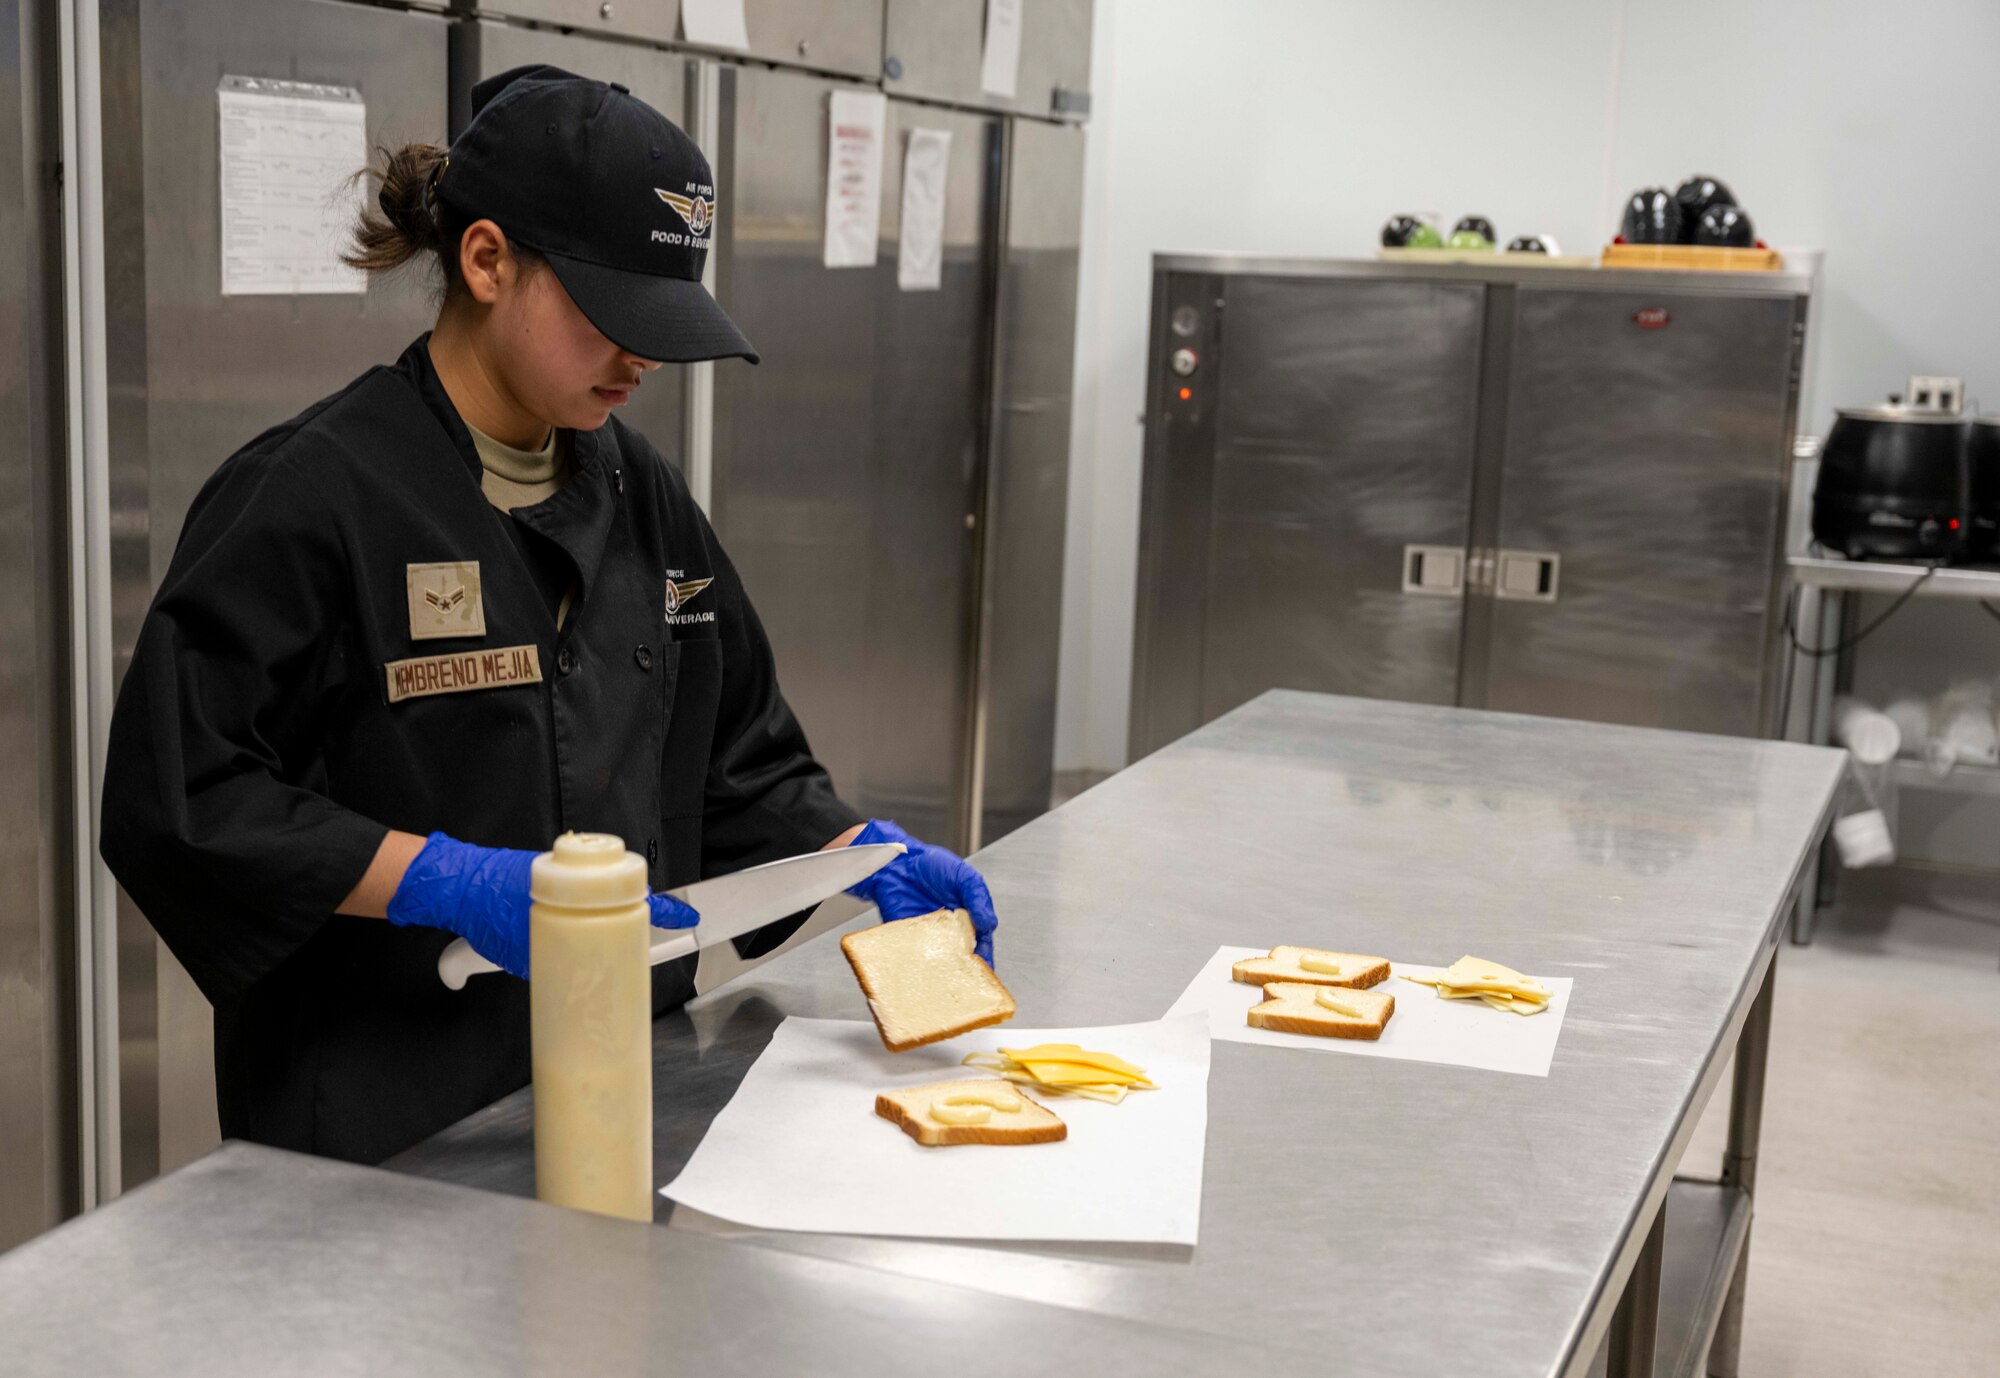 U.S. Air Force Airman 1st Class Nolvia Membreno Mejia, 49th Force Support Squadron food services apprentice, prepares a grilled cheese sandwich in the 49er Cafe at Holloman Air Force Base, New Mexico, March 27, 2024. The 49er Cafe, located within Club Holloman, launched a new breakfast and lunch menu with a selection of salads, sandwiches, wraps, and grab-and-go items that provide everyone with easy and healthful options. (U.S. Air Force photo by Airman 1st Class Michelle Ferrari)